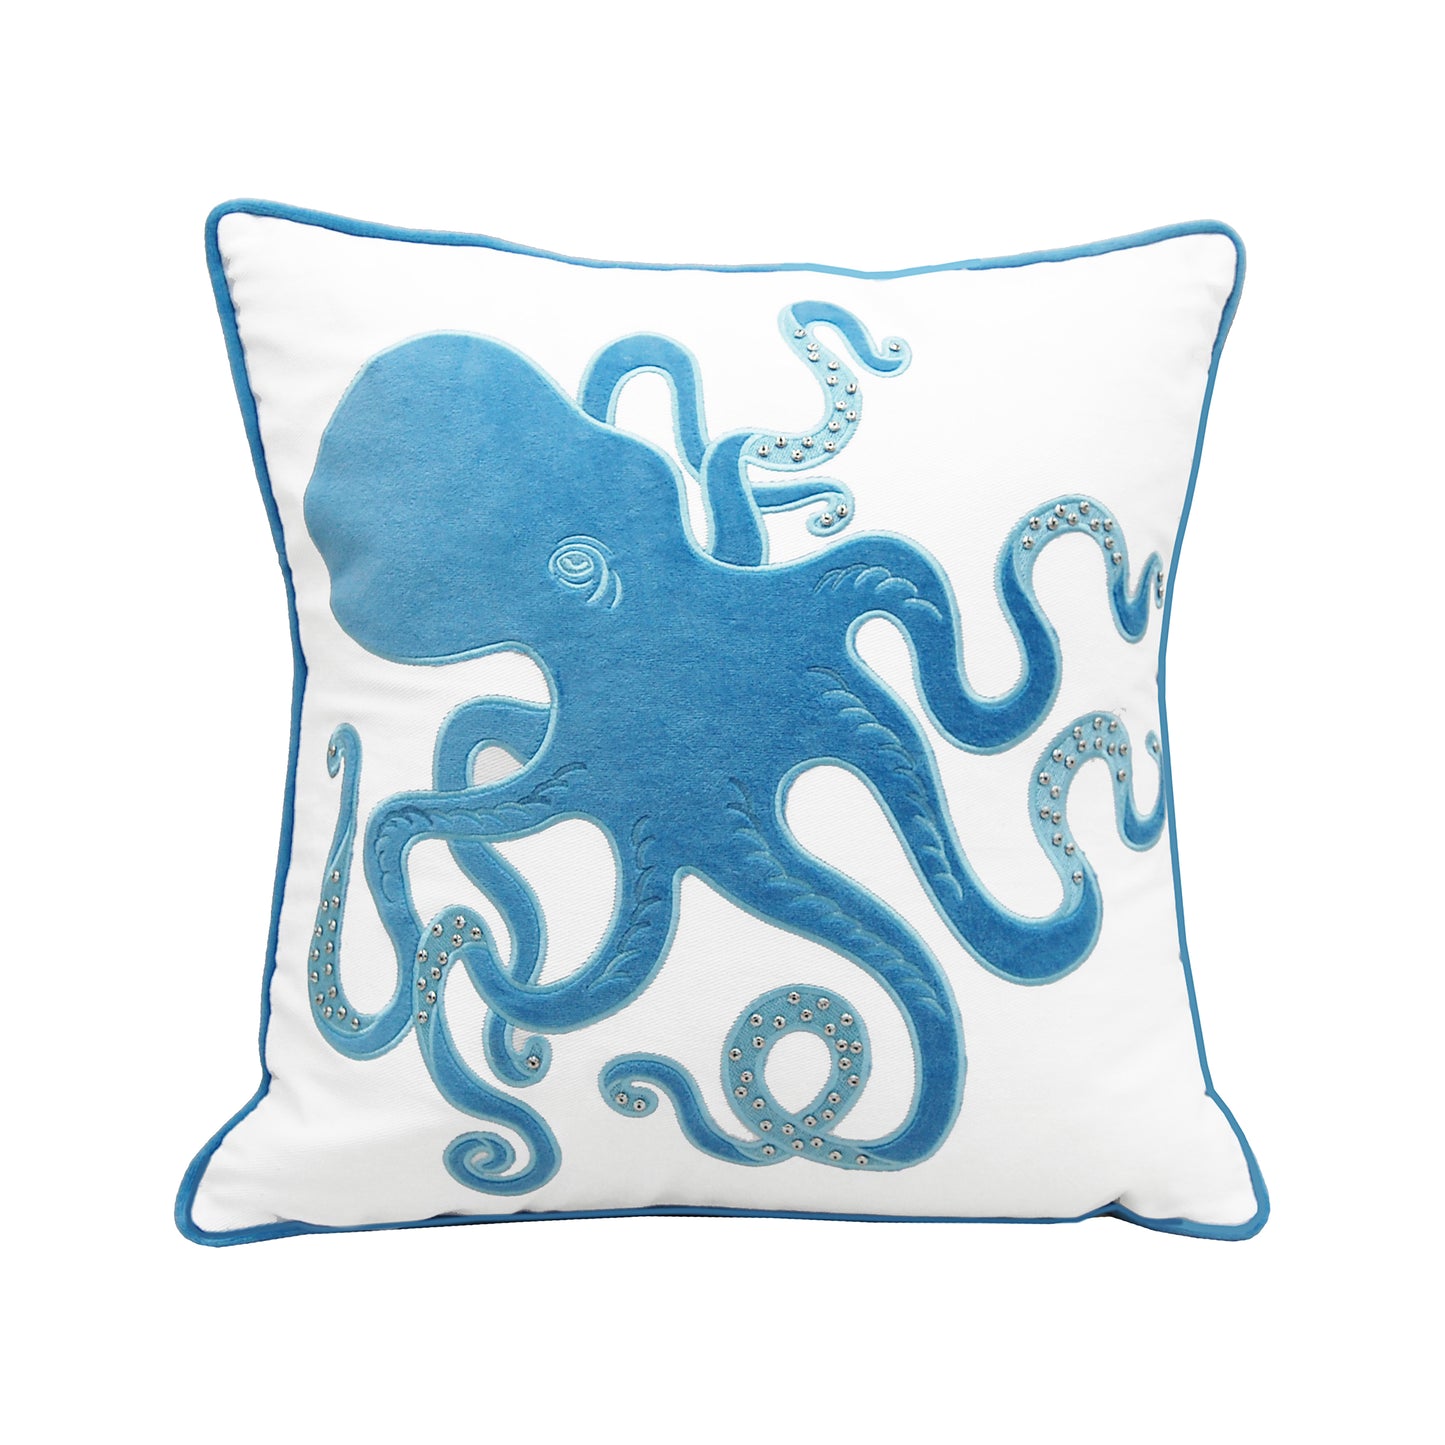 Blue velvet octopus embroidered on a white ground outdoor pillow with silver beaded accents and blue piped edging..